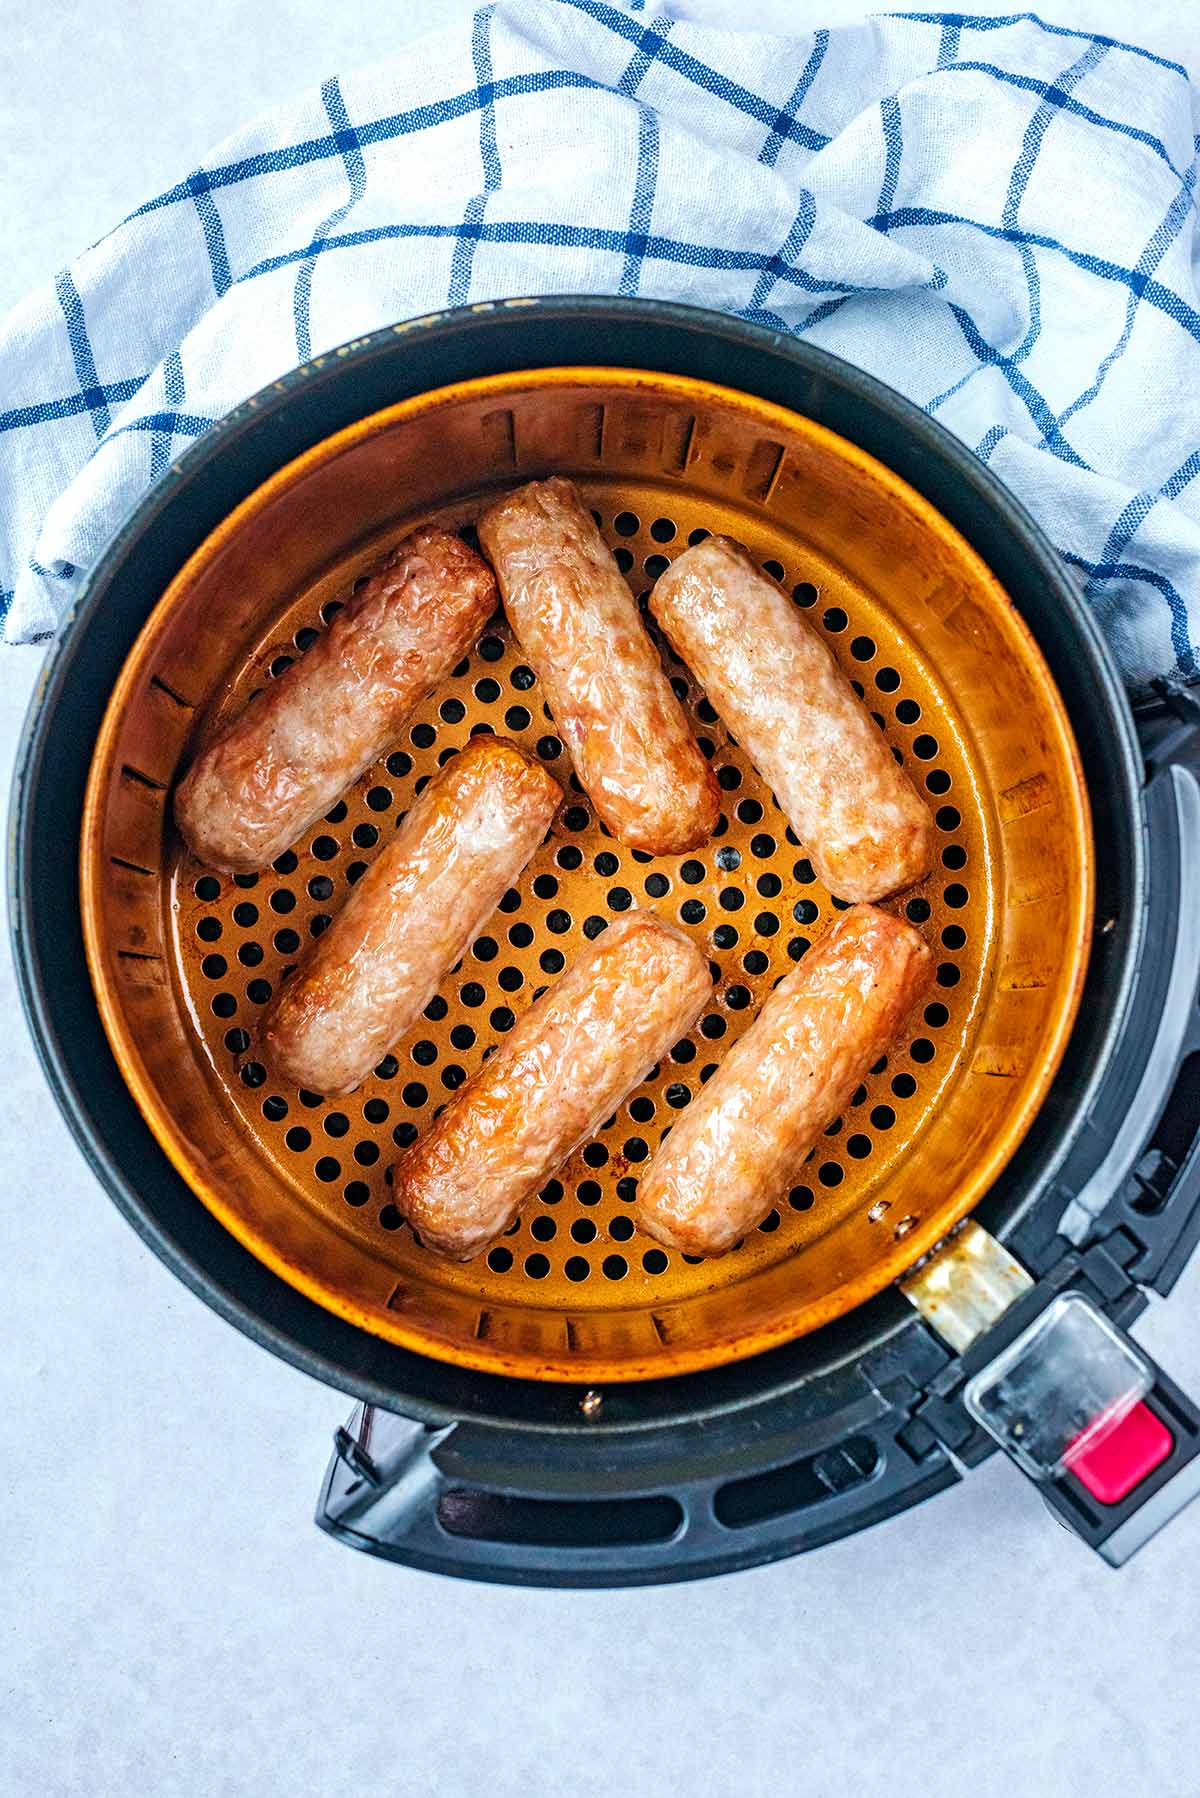 An air fryer basket containing cooked sausages.